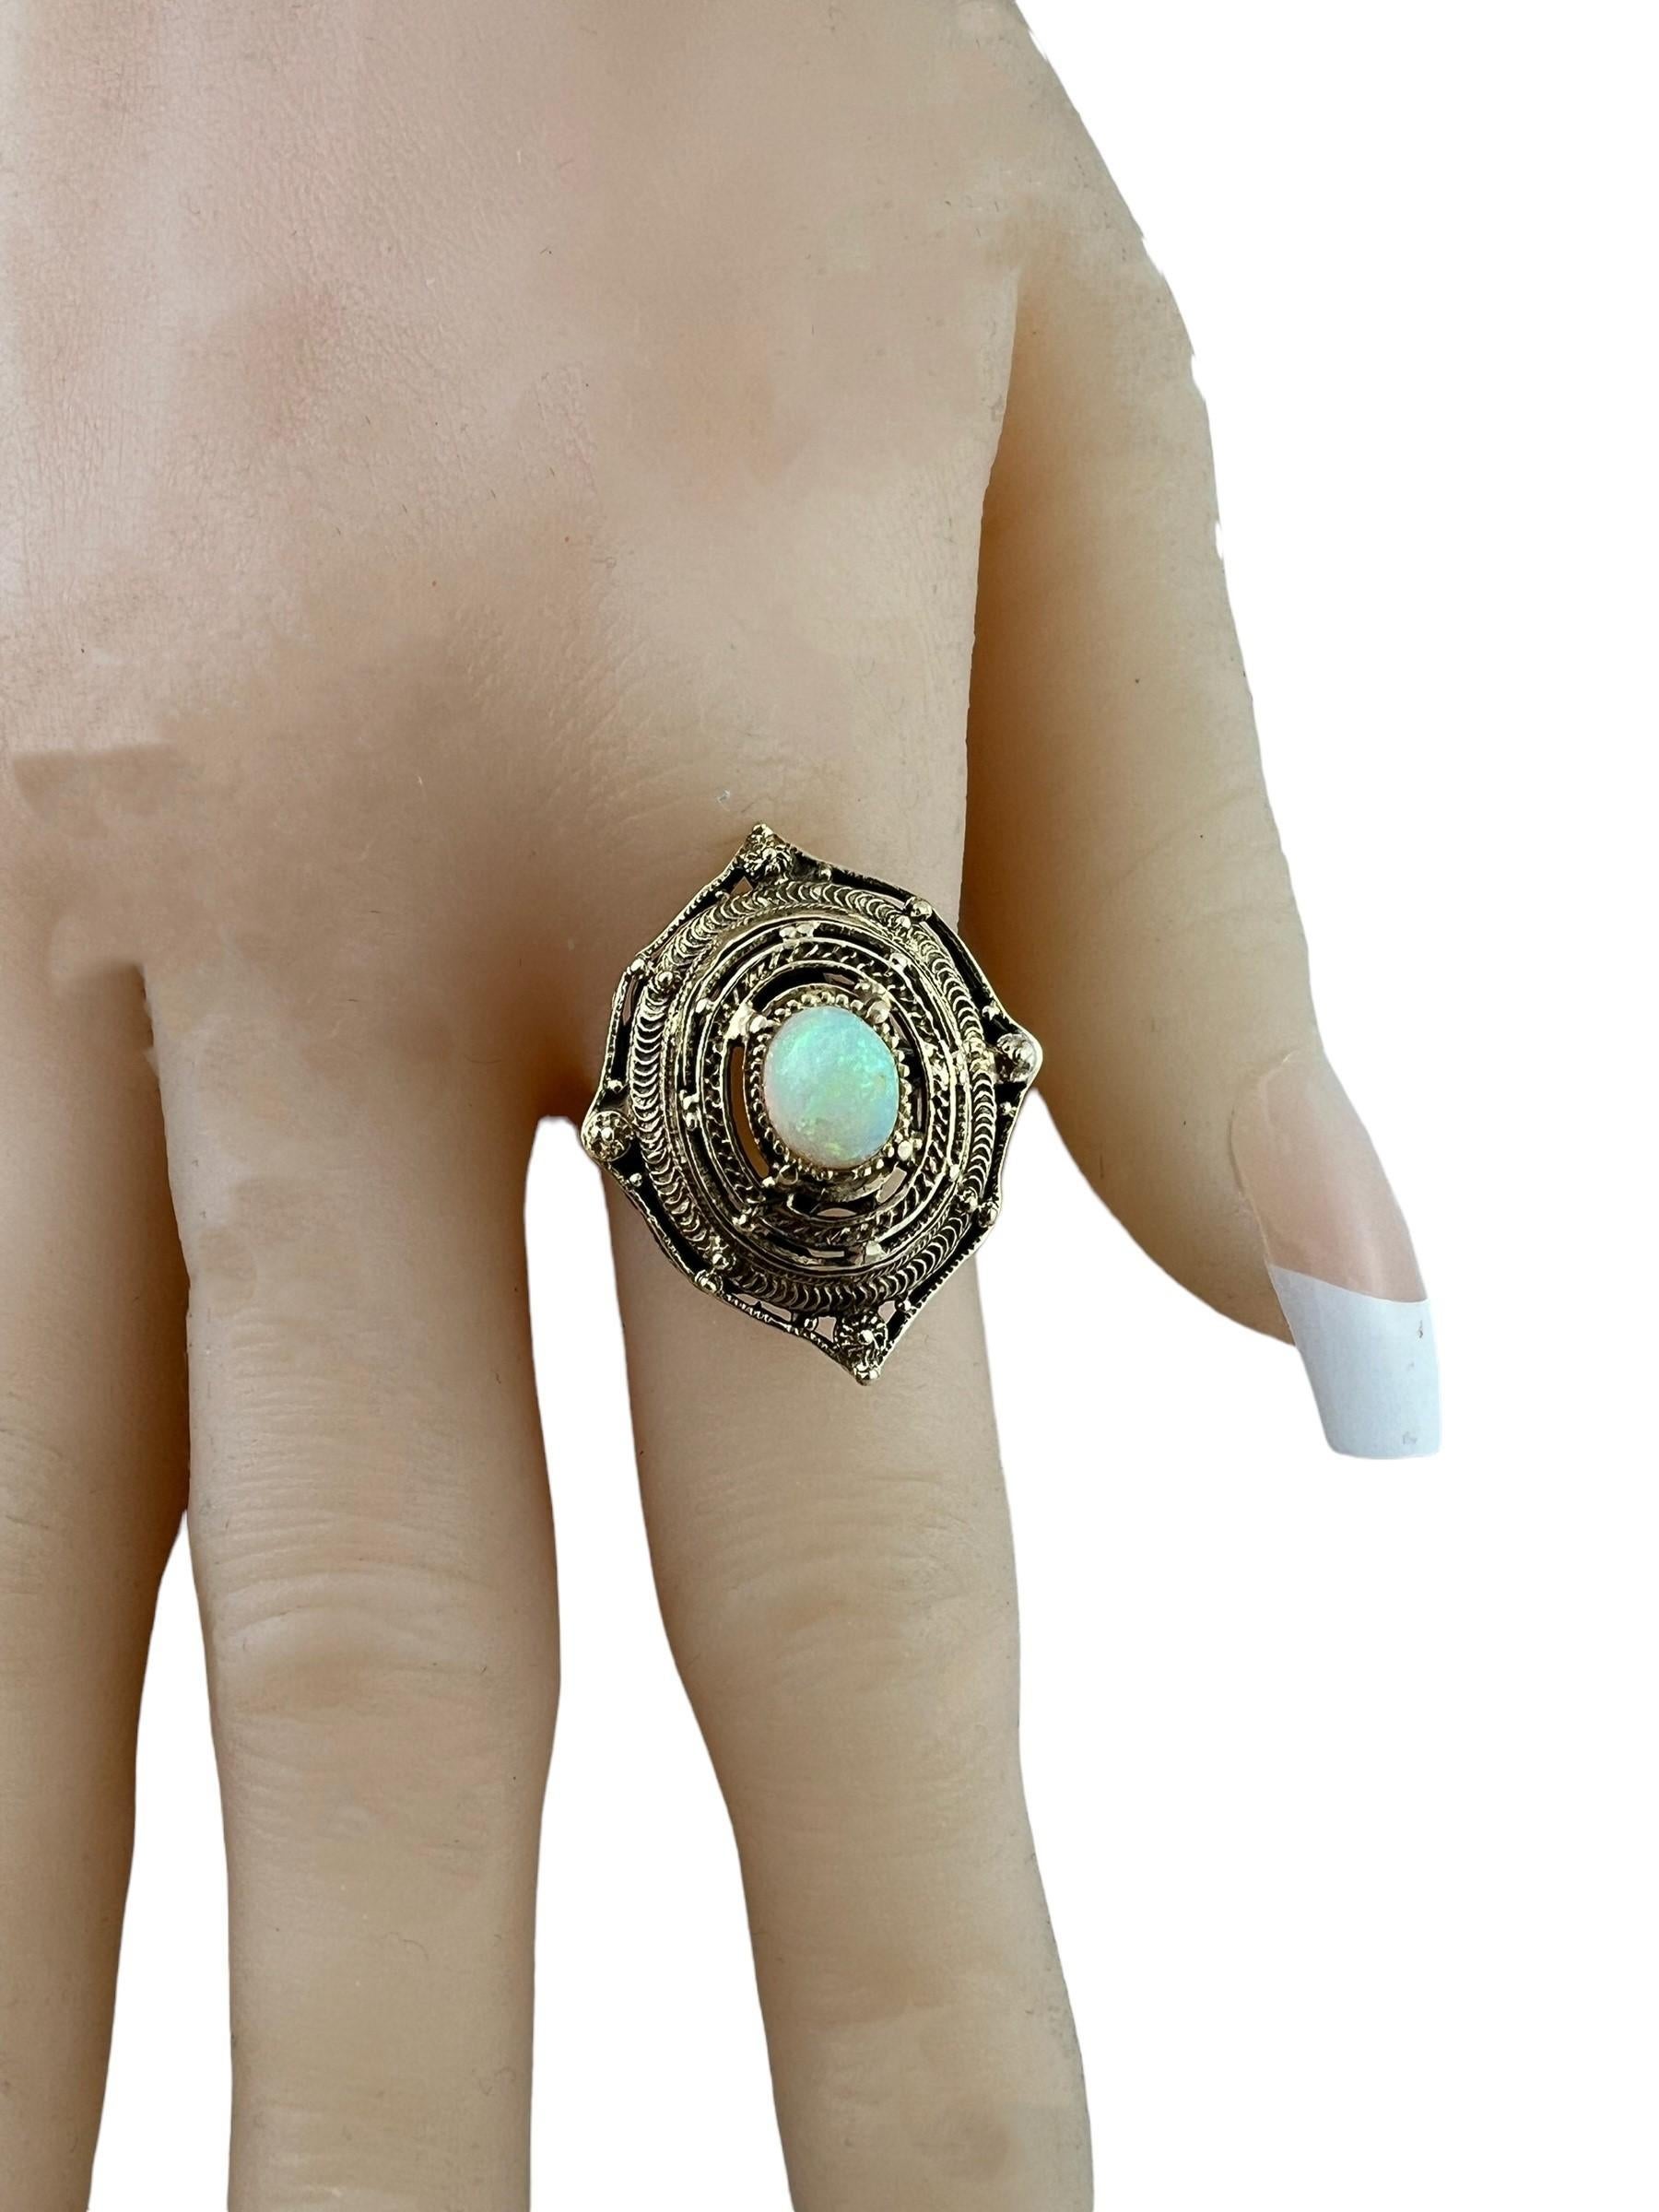 14K Yellow Gold Ornate Opal Dome Ring #16566 For Sale 6